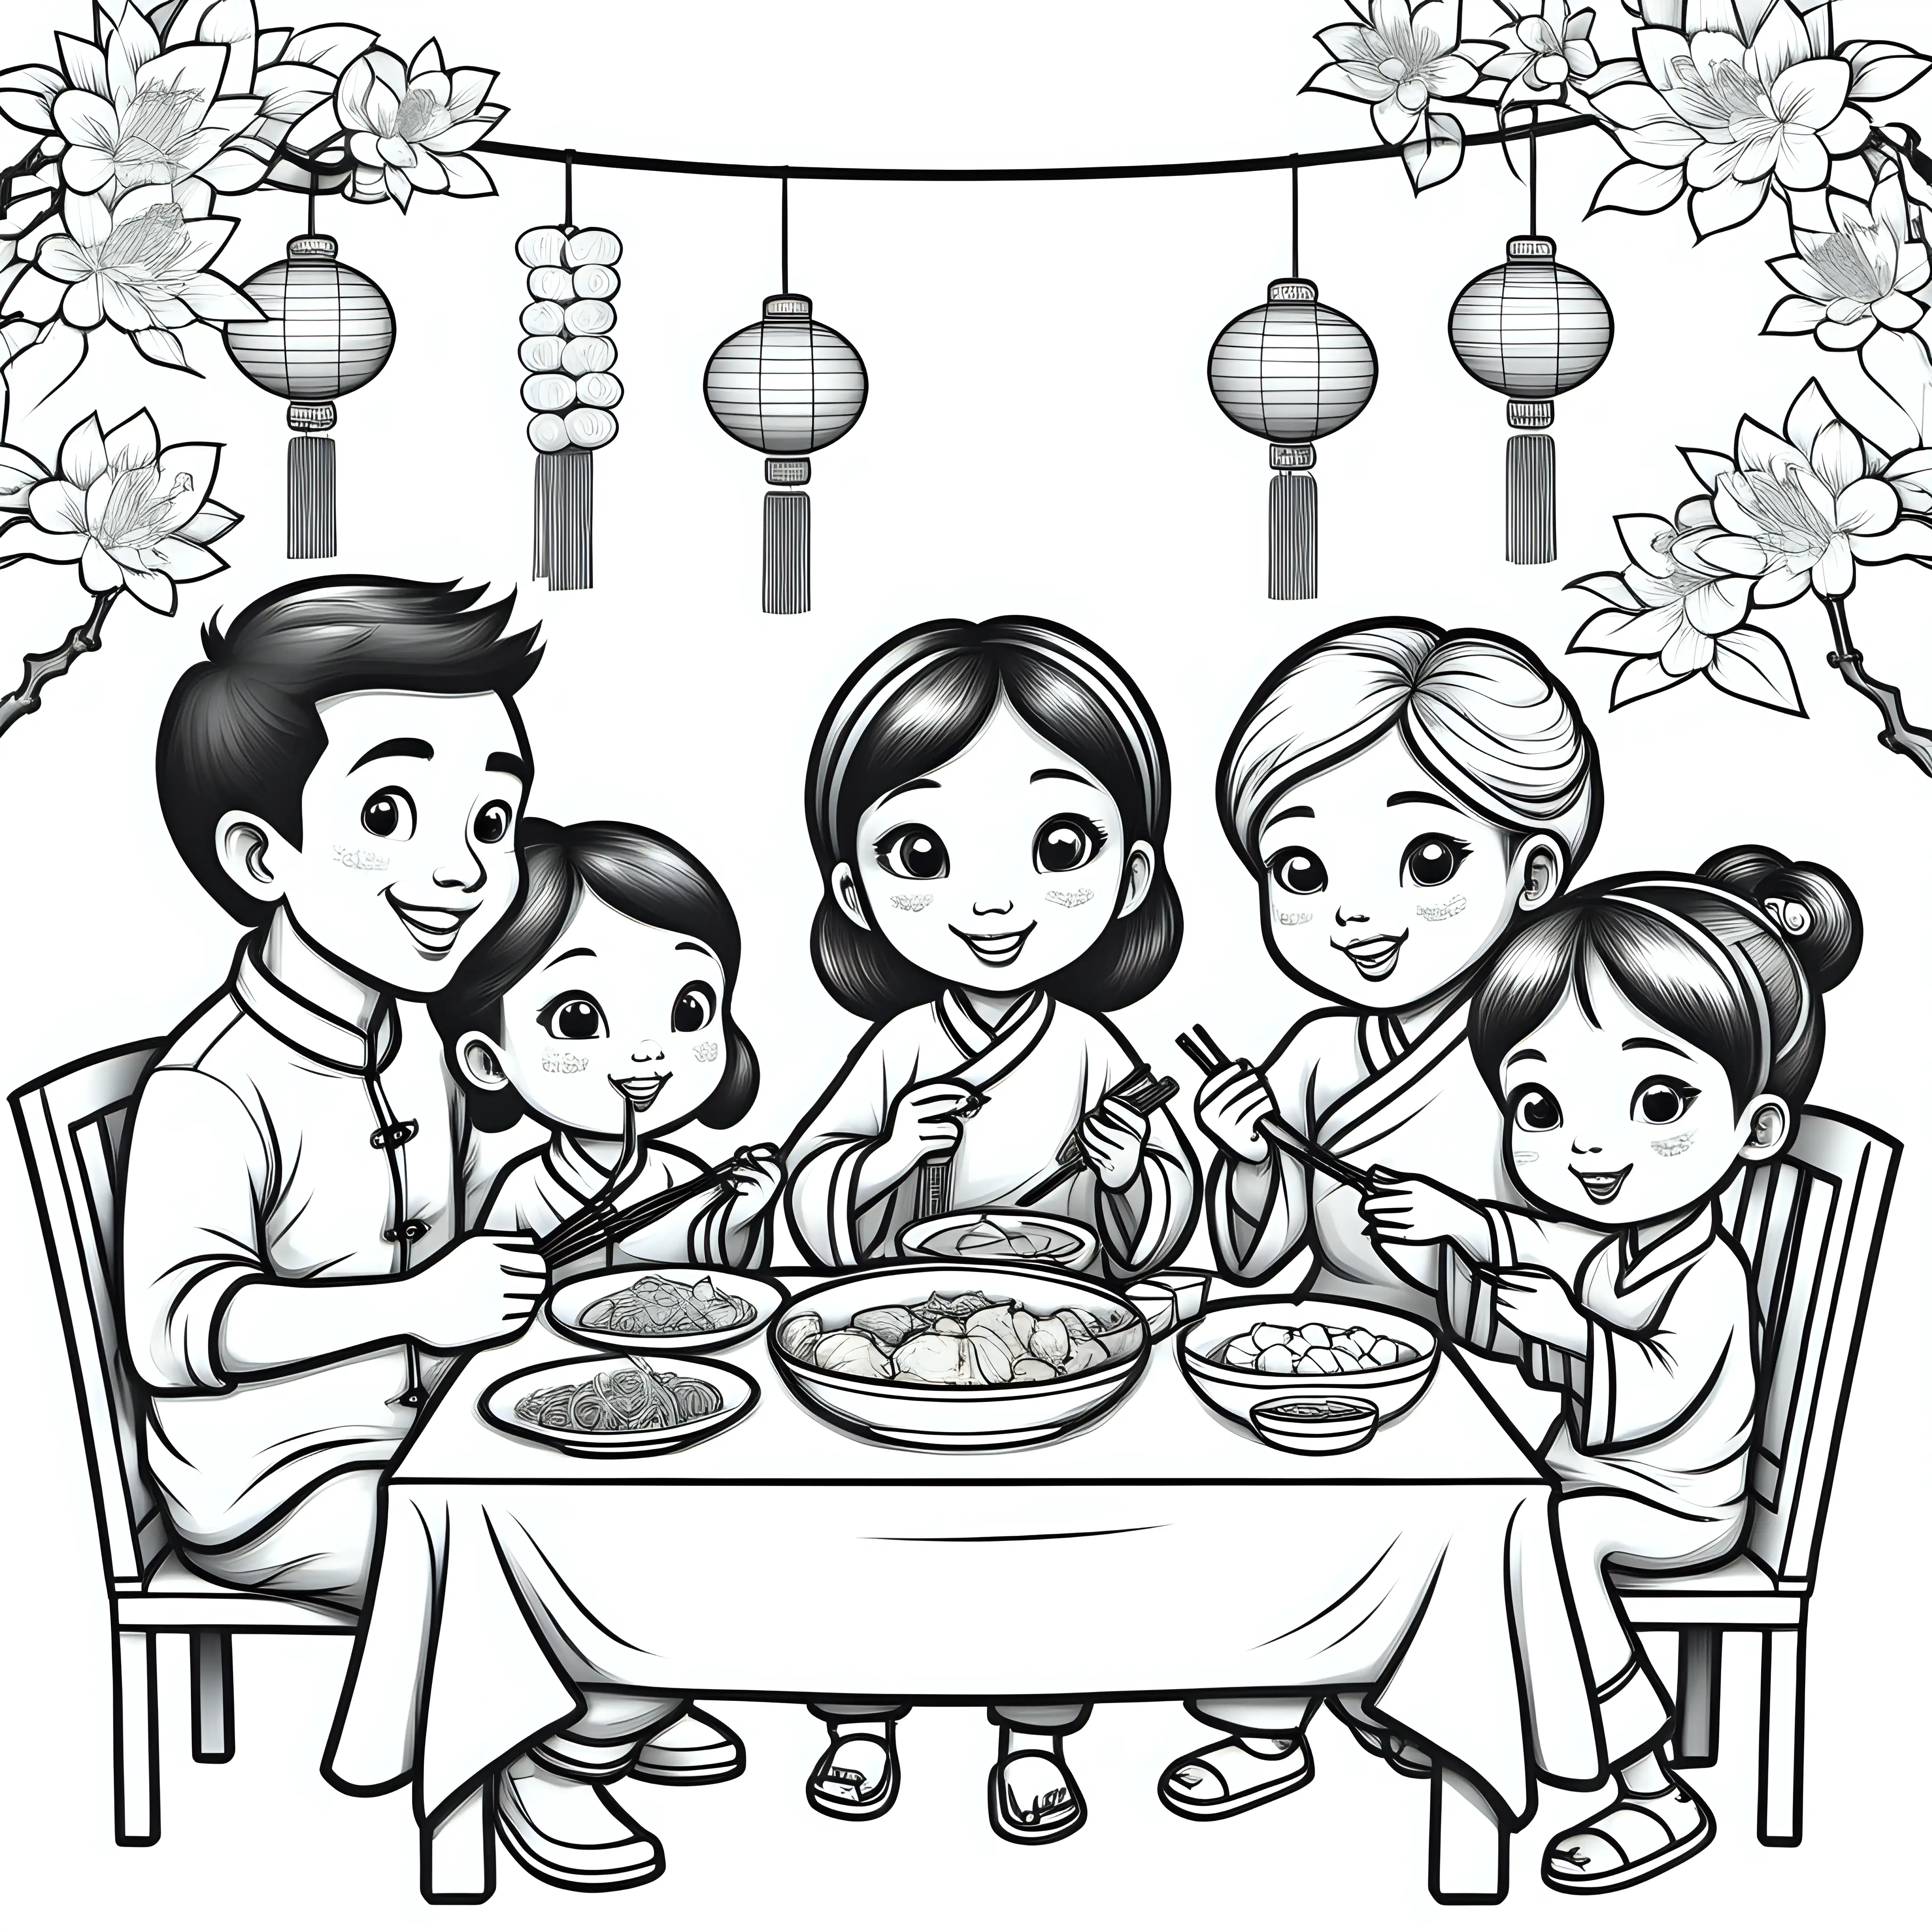 kids colouring book page, family eating Chinese dinner, lunar new year,  cartoon style, no shading, outline only
  
